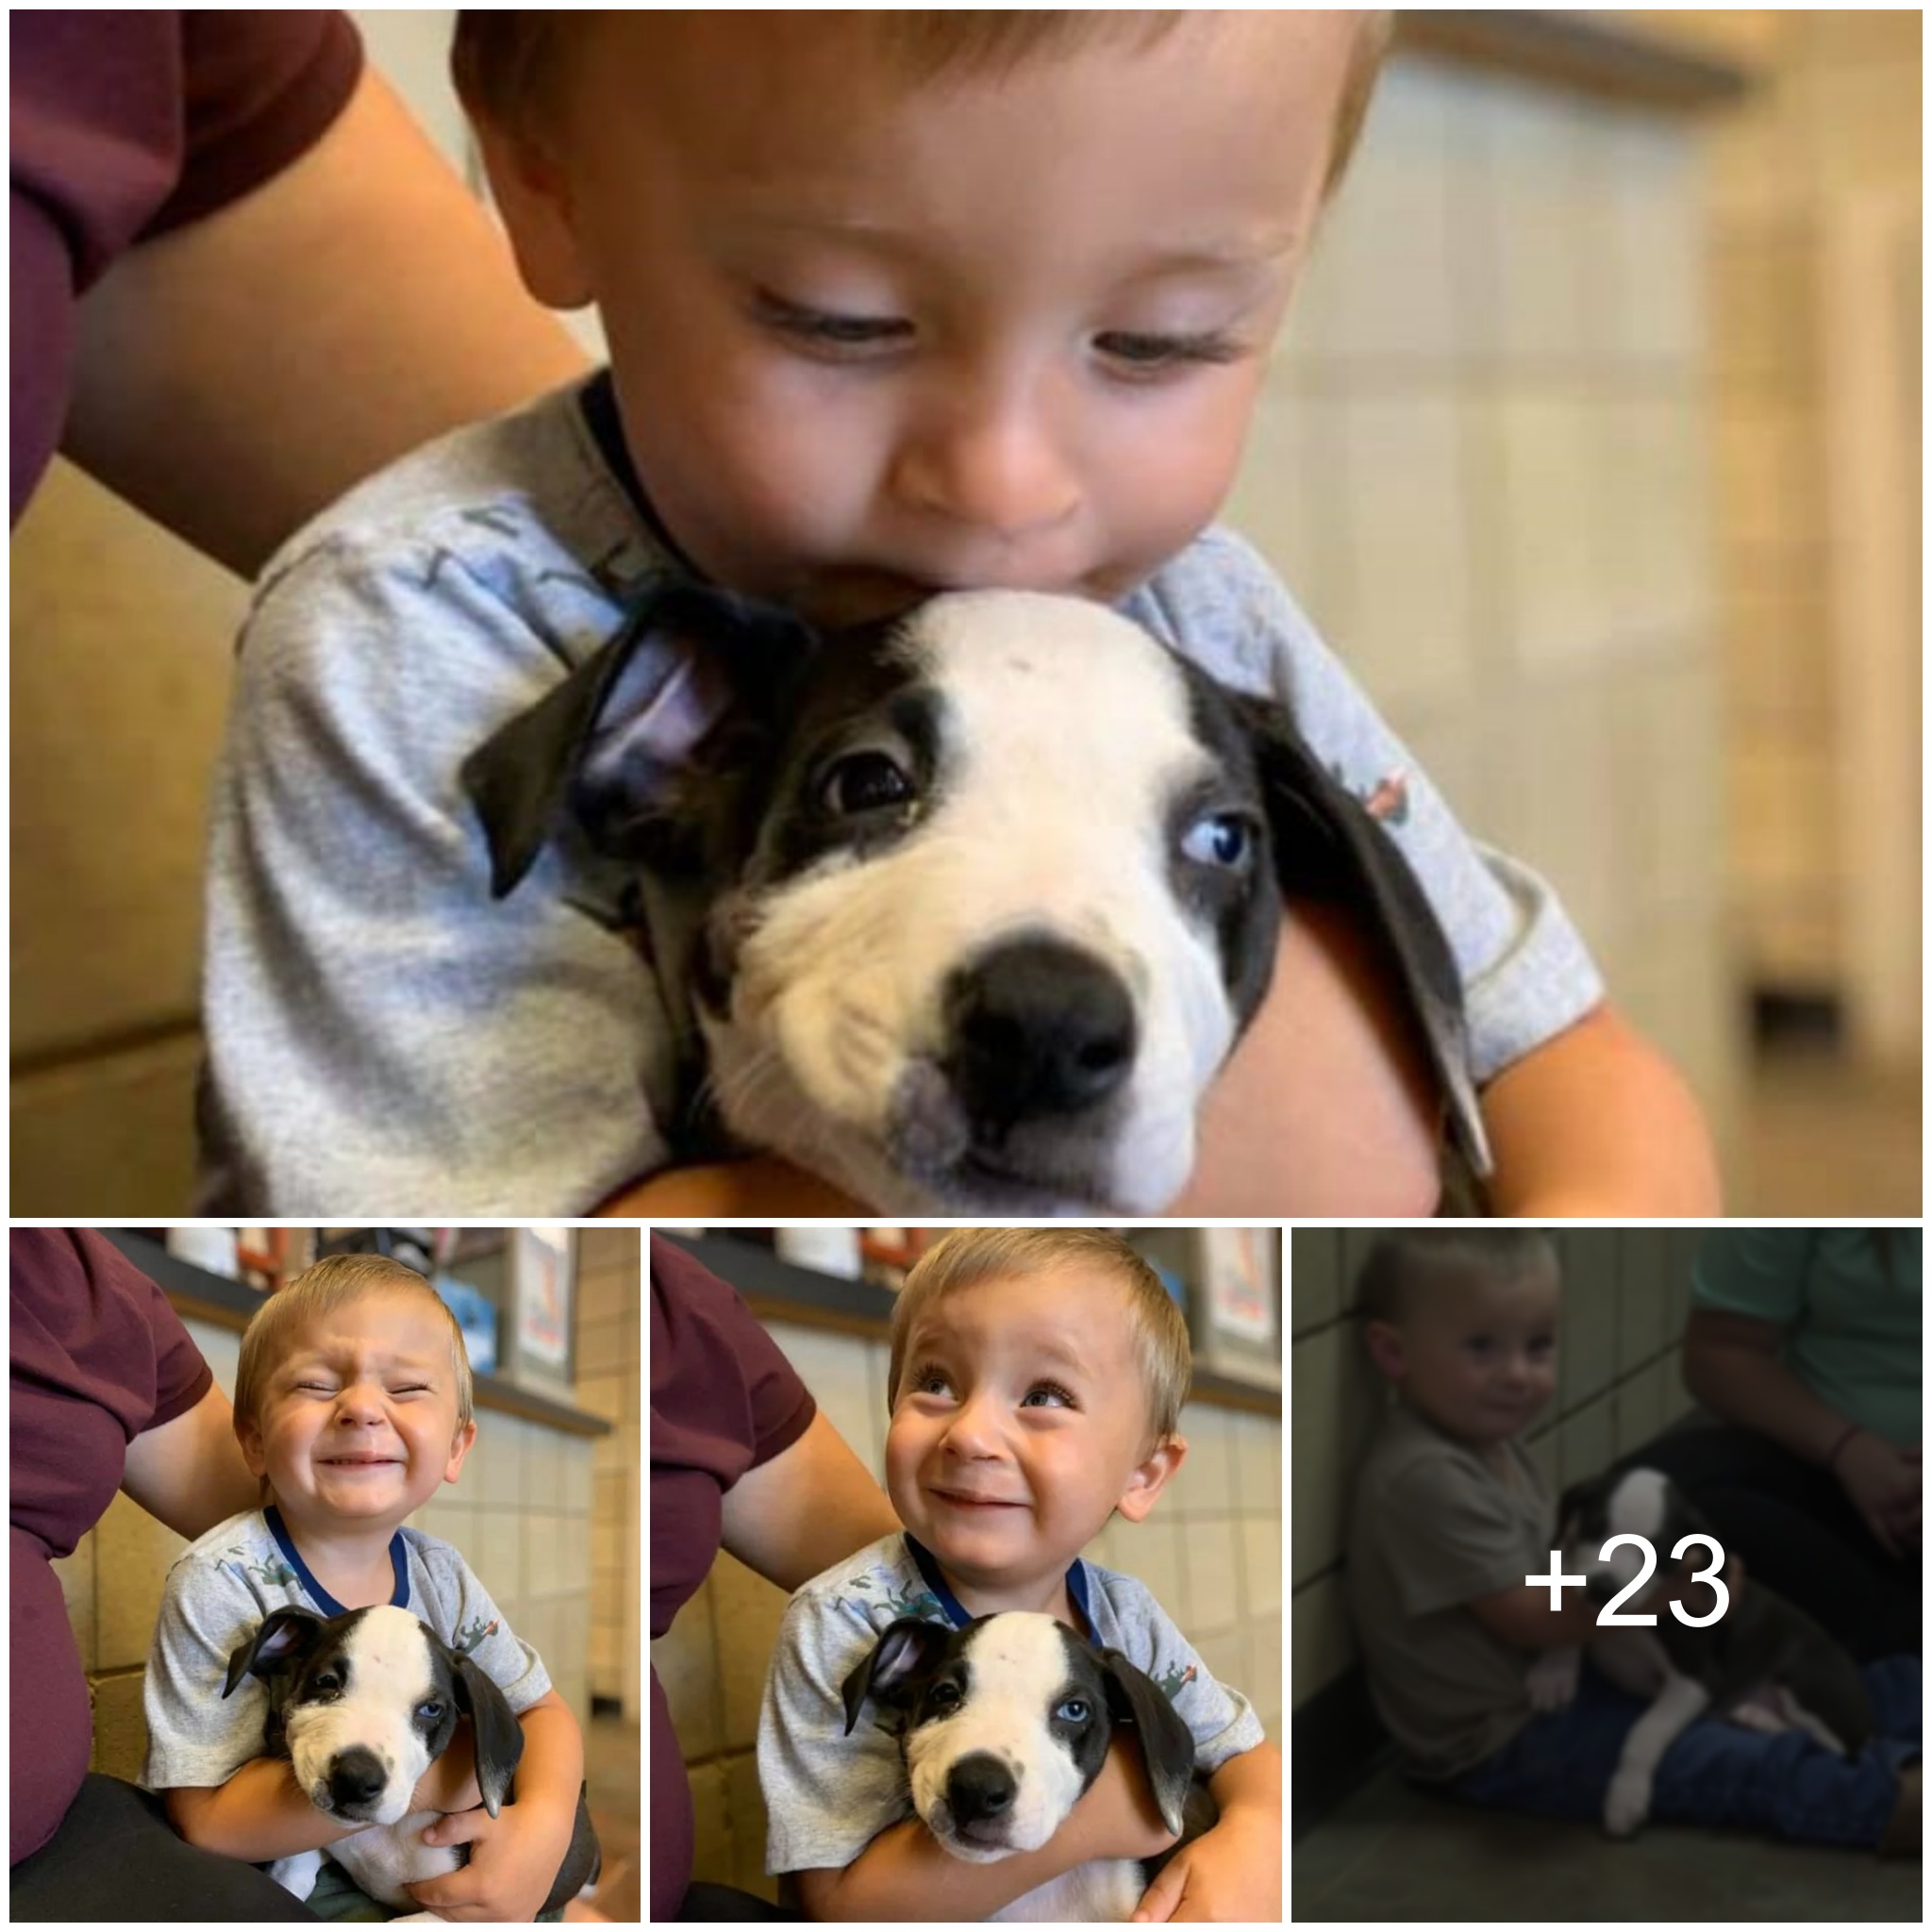 The Heartwarming Experience of a Dog Comforting and Playing with an Autistic Child, Restoring Smiles and Moving Hearts of Parents and Onlookers